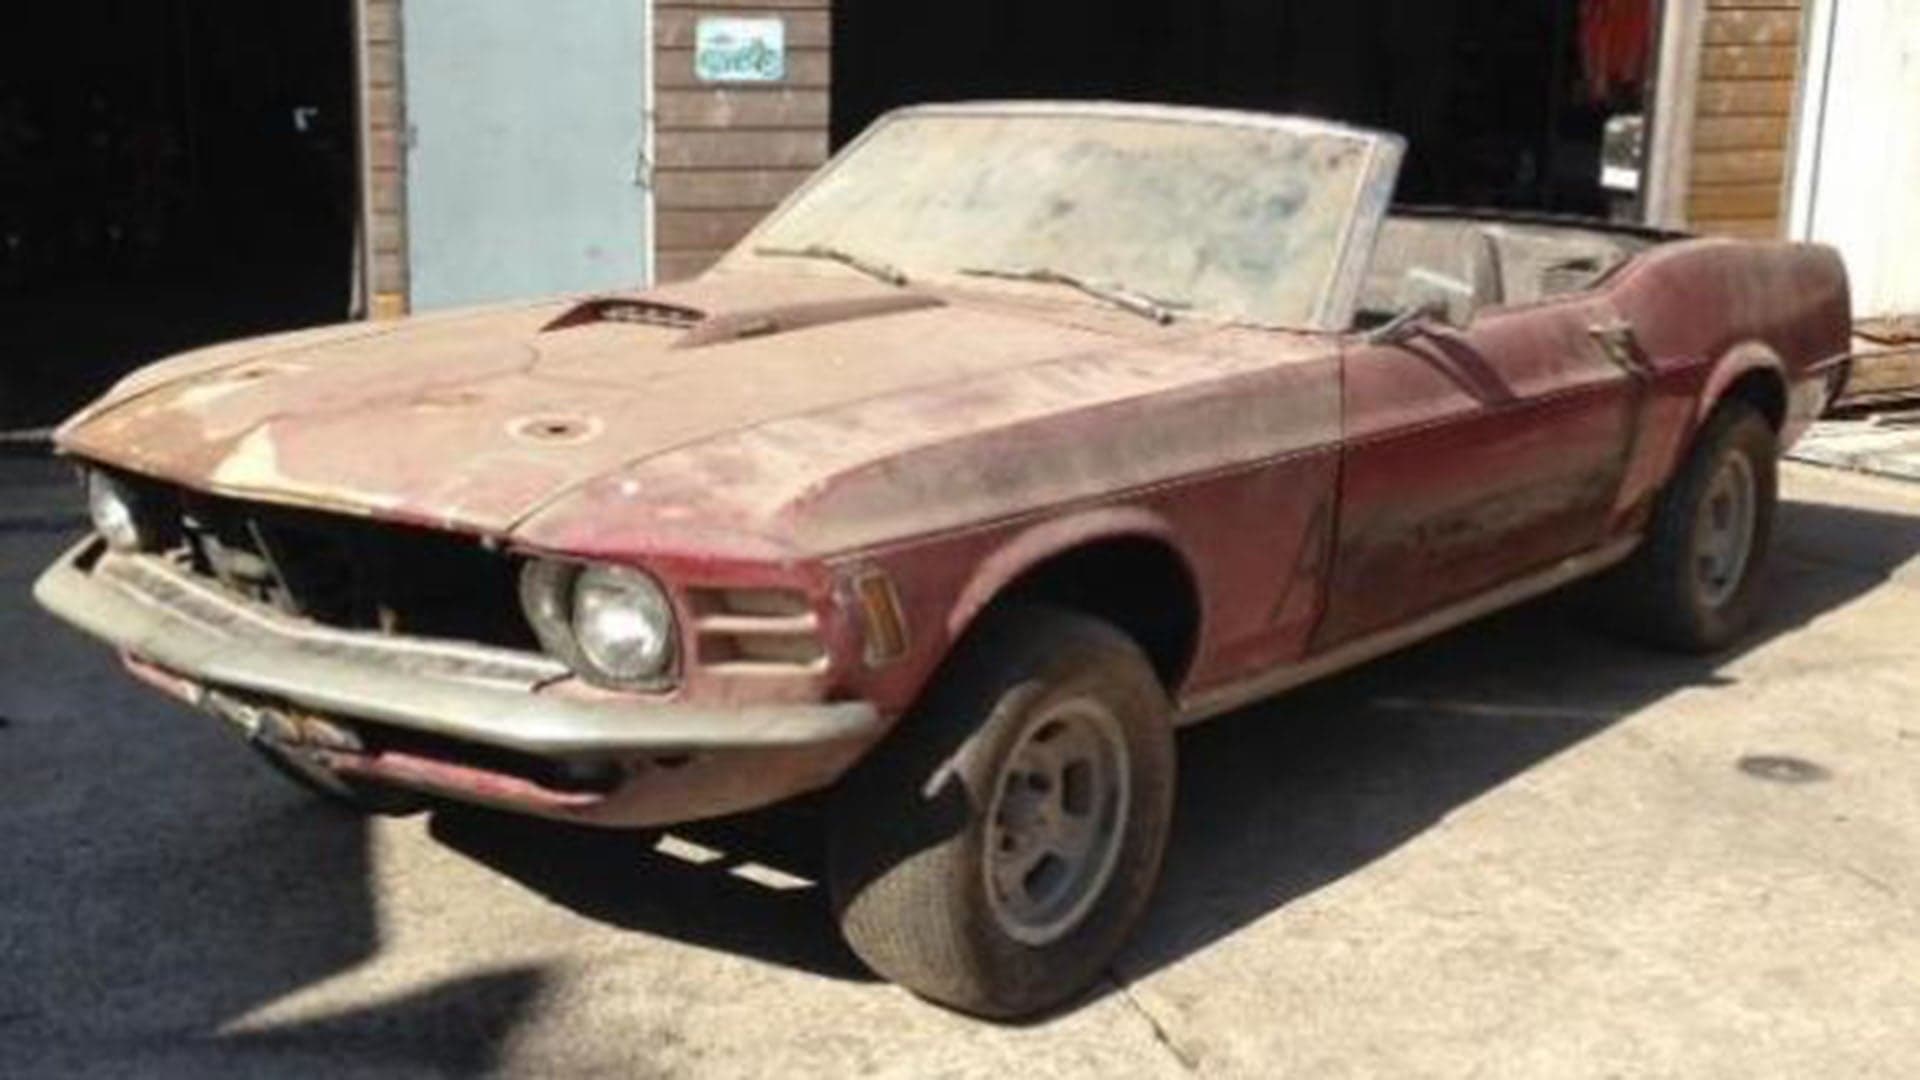 A 1970 AWD Ford Mustang Convertible is the Latest Incredible Barn Find